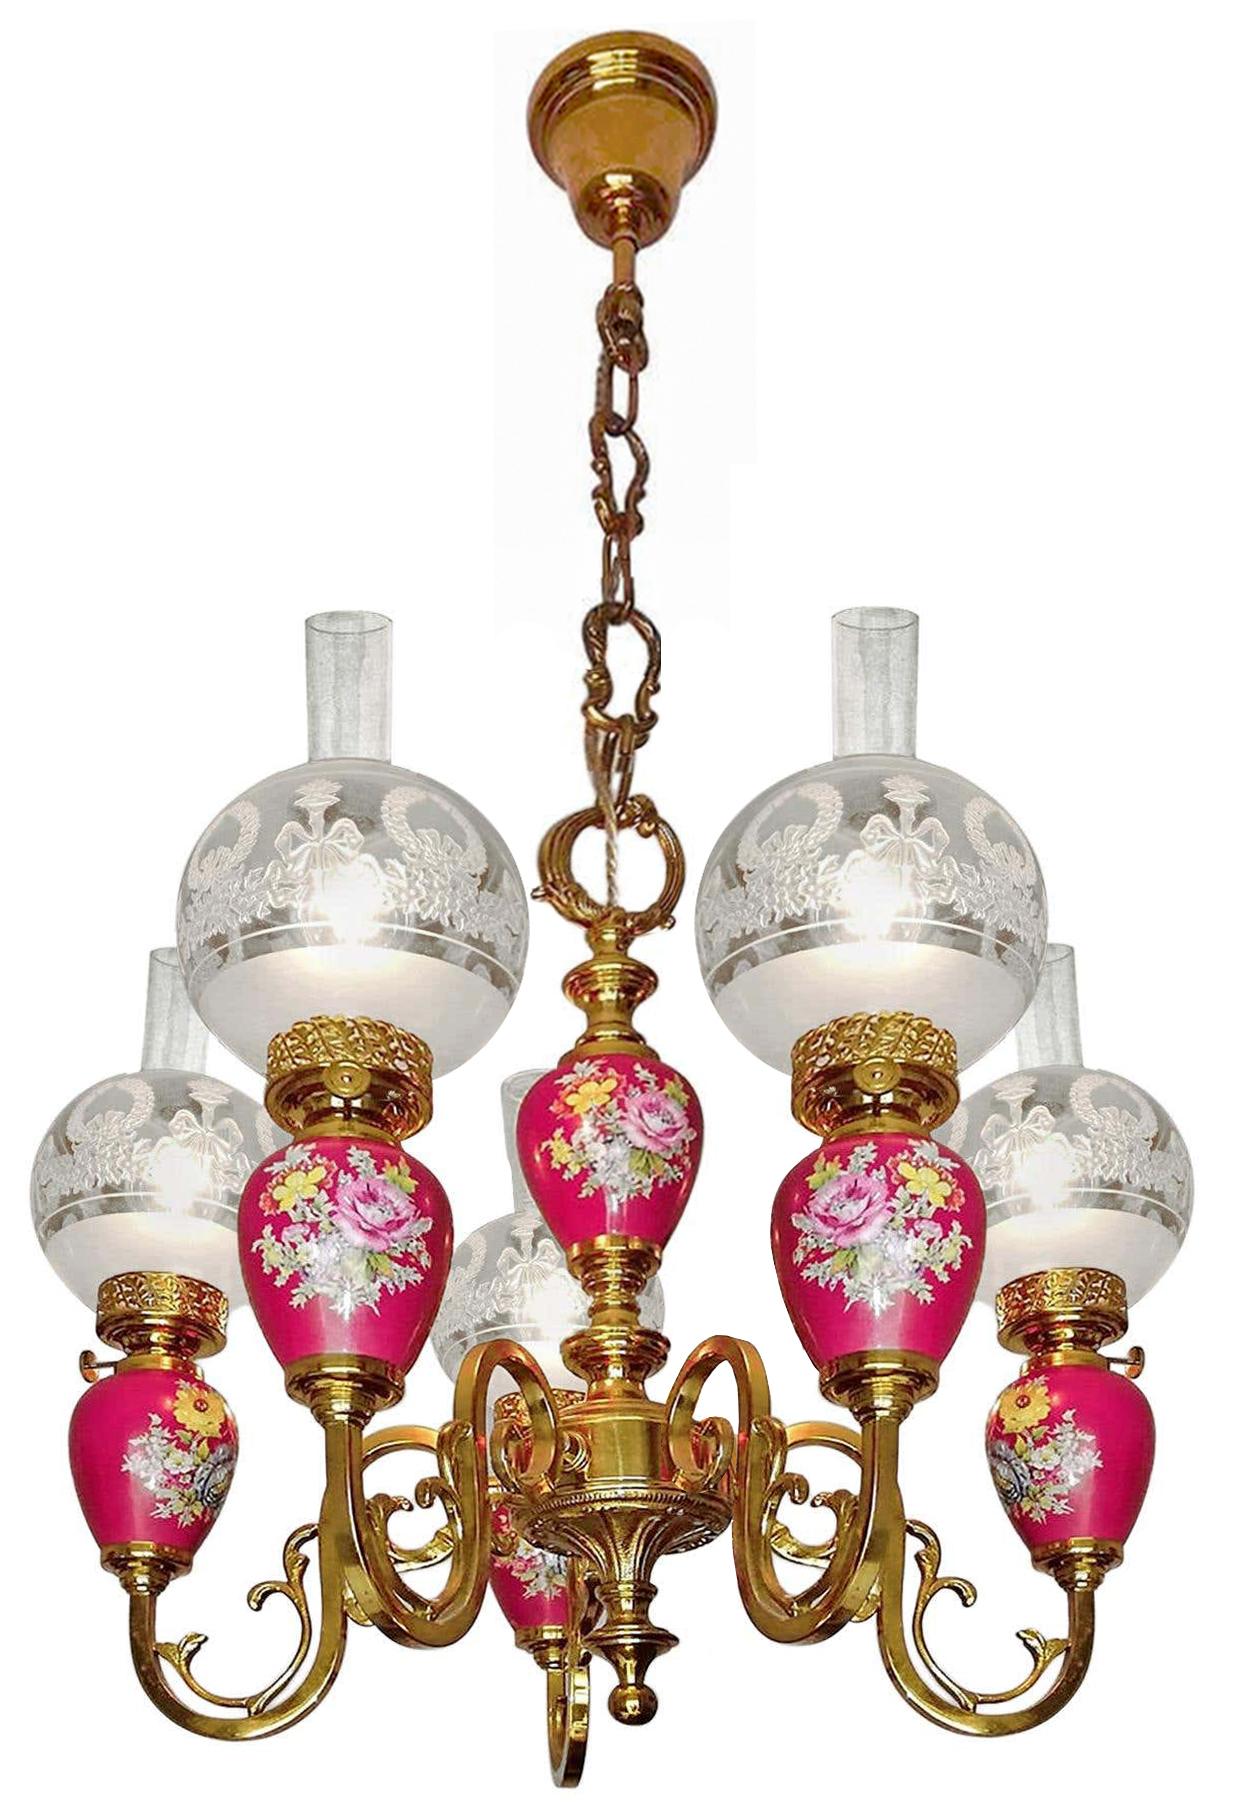 Gorgeous French Limoges style fuchsia pink hand painted porcelain with exquisite floral arrangements, solid gilt brass and etched glass 5-light oil lamp chandelier.
A pair available.

Dimensions:
Height: 31.5 in. (80 cm)
Diameter: 22.05 in. (56